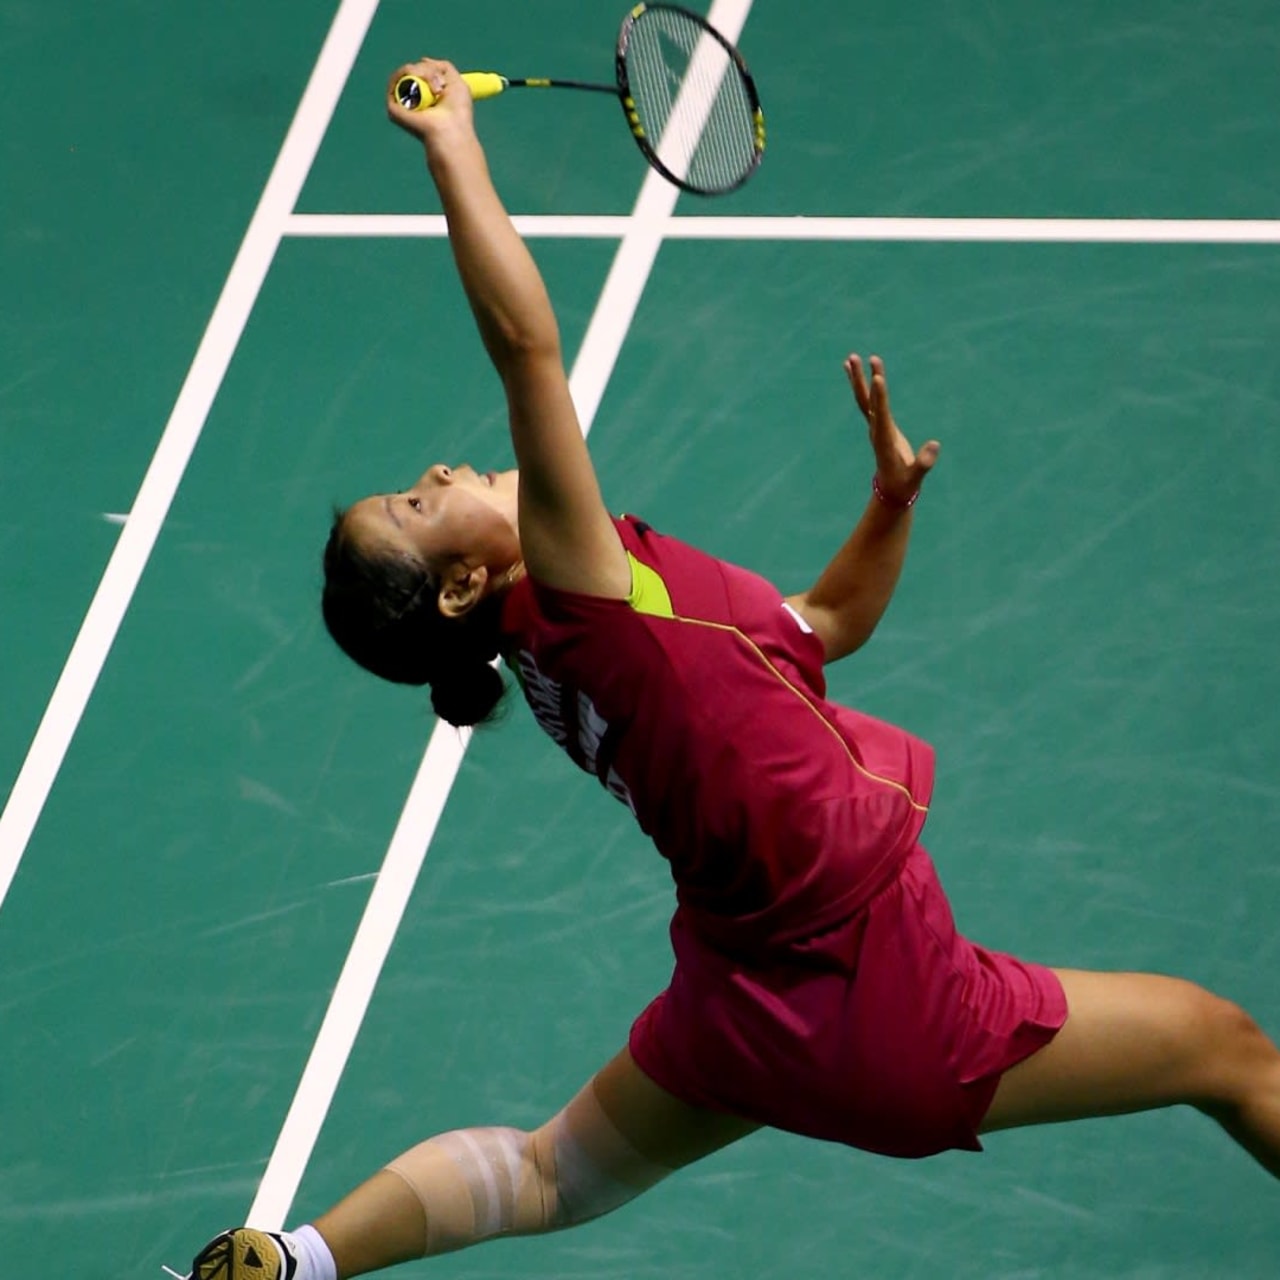 watch badminton live streaming free